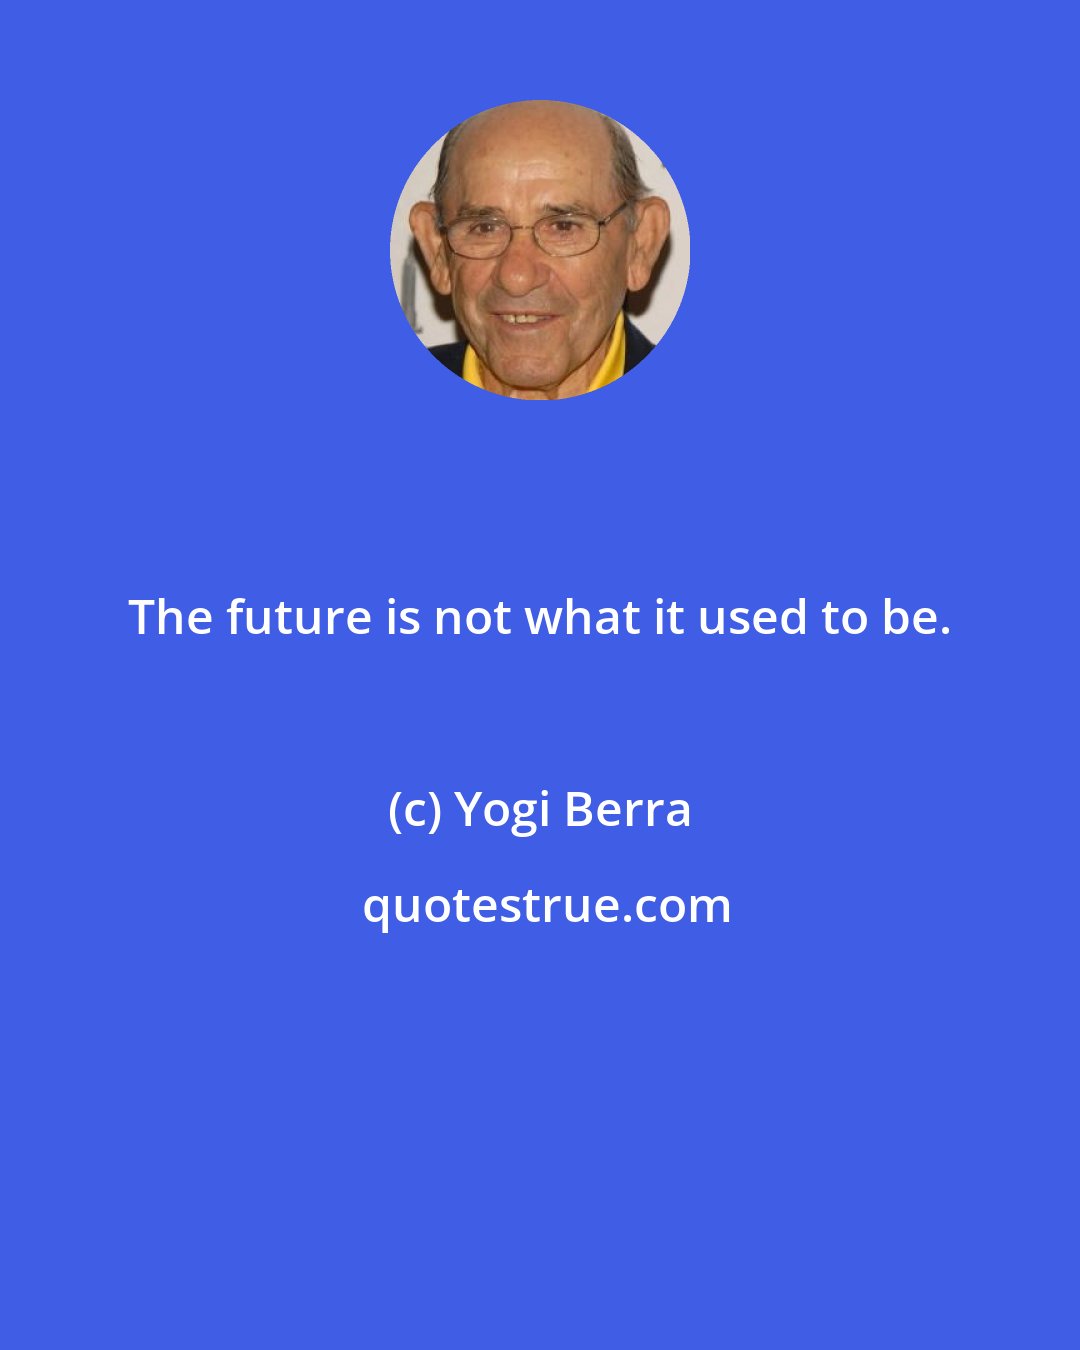 Yogi Berra: The future is not what it used to be.